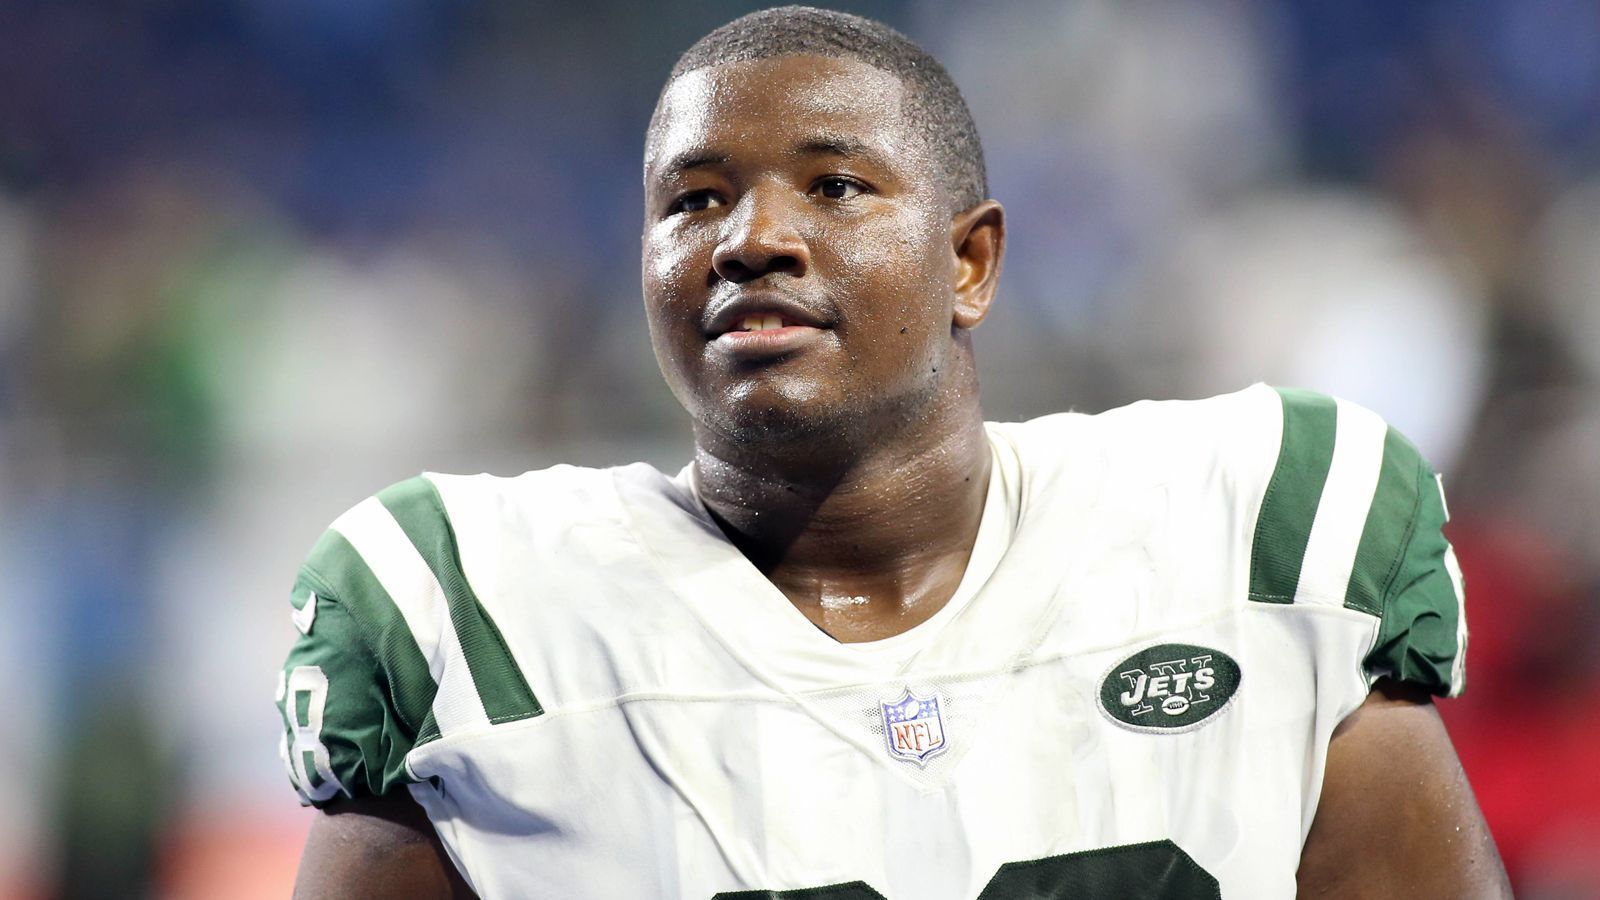 
                <strong>New York Jets: Kelvin Beachum</strong><br>
                Position: Offensive Tackle
              